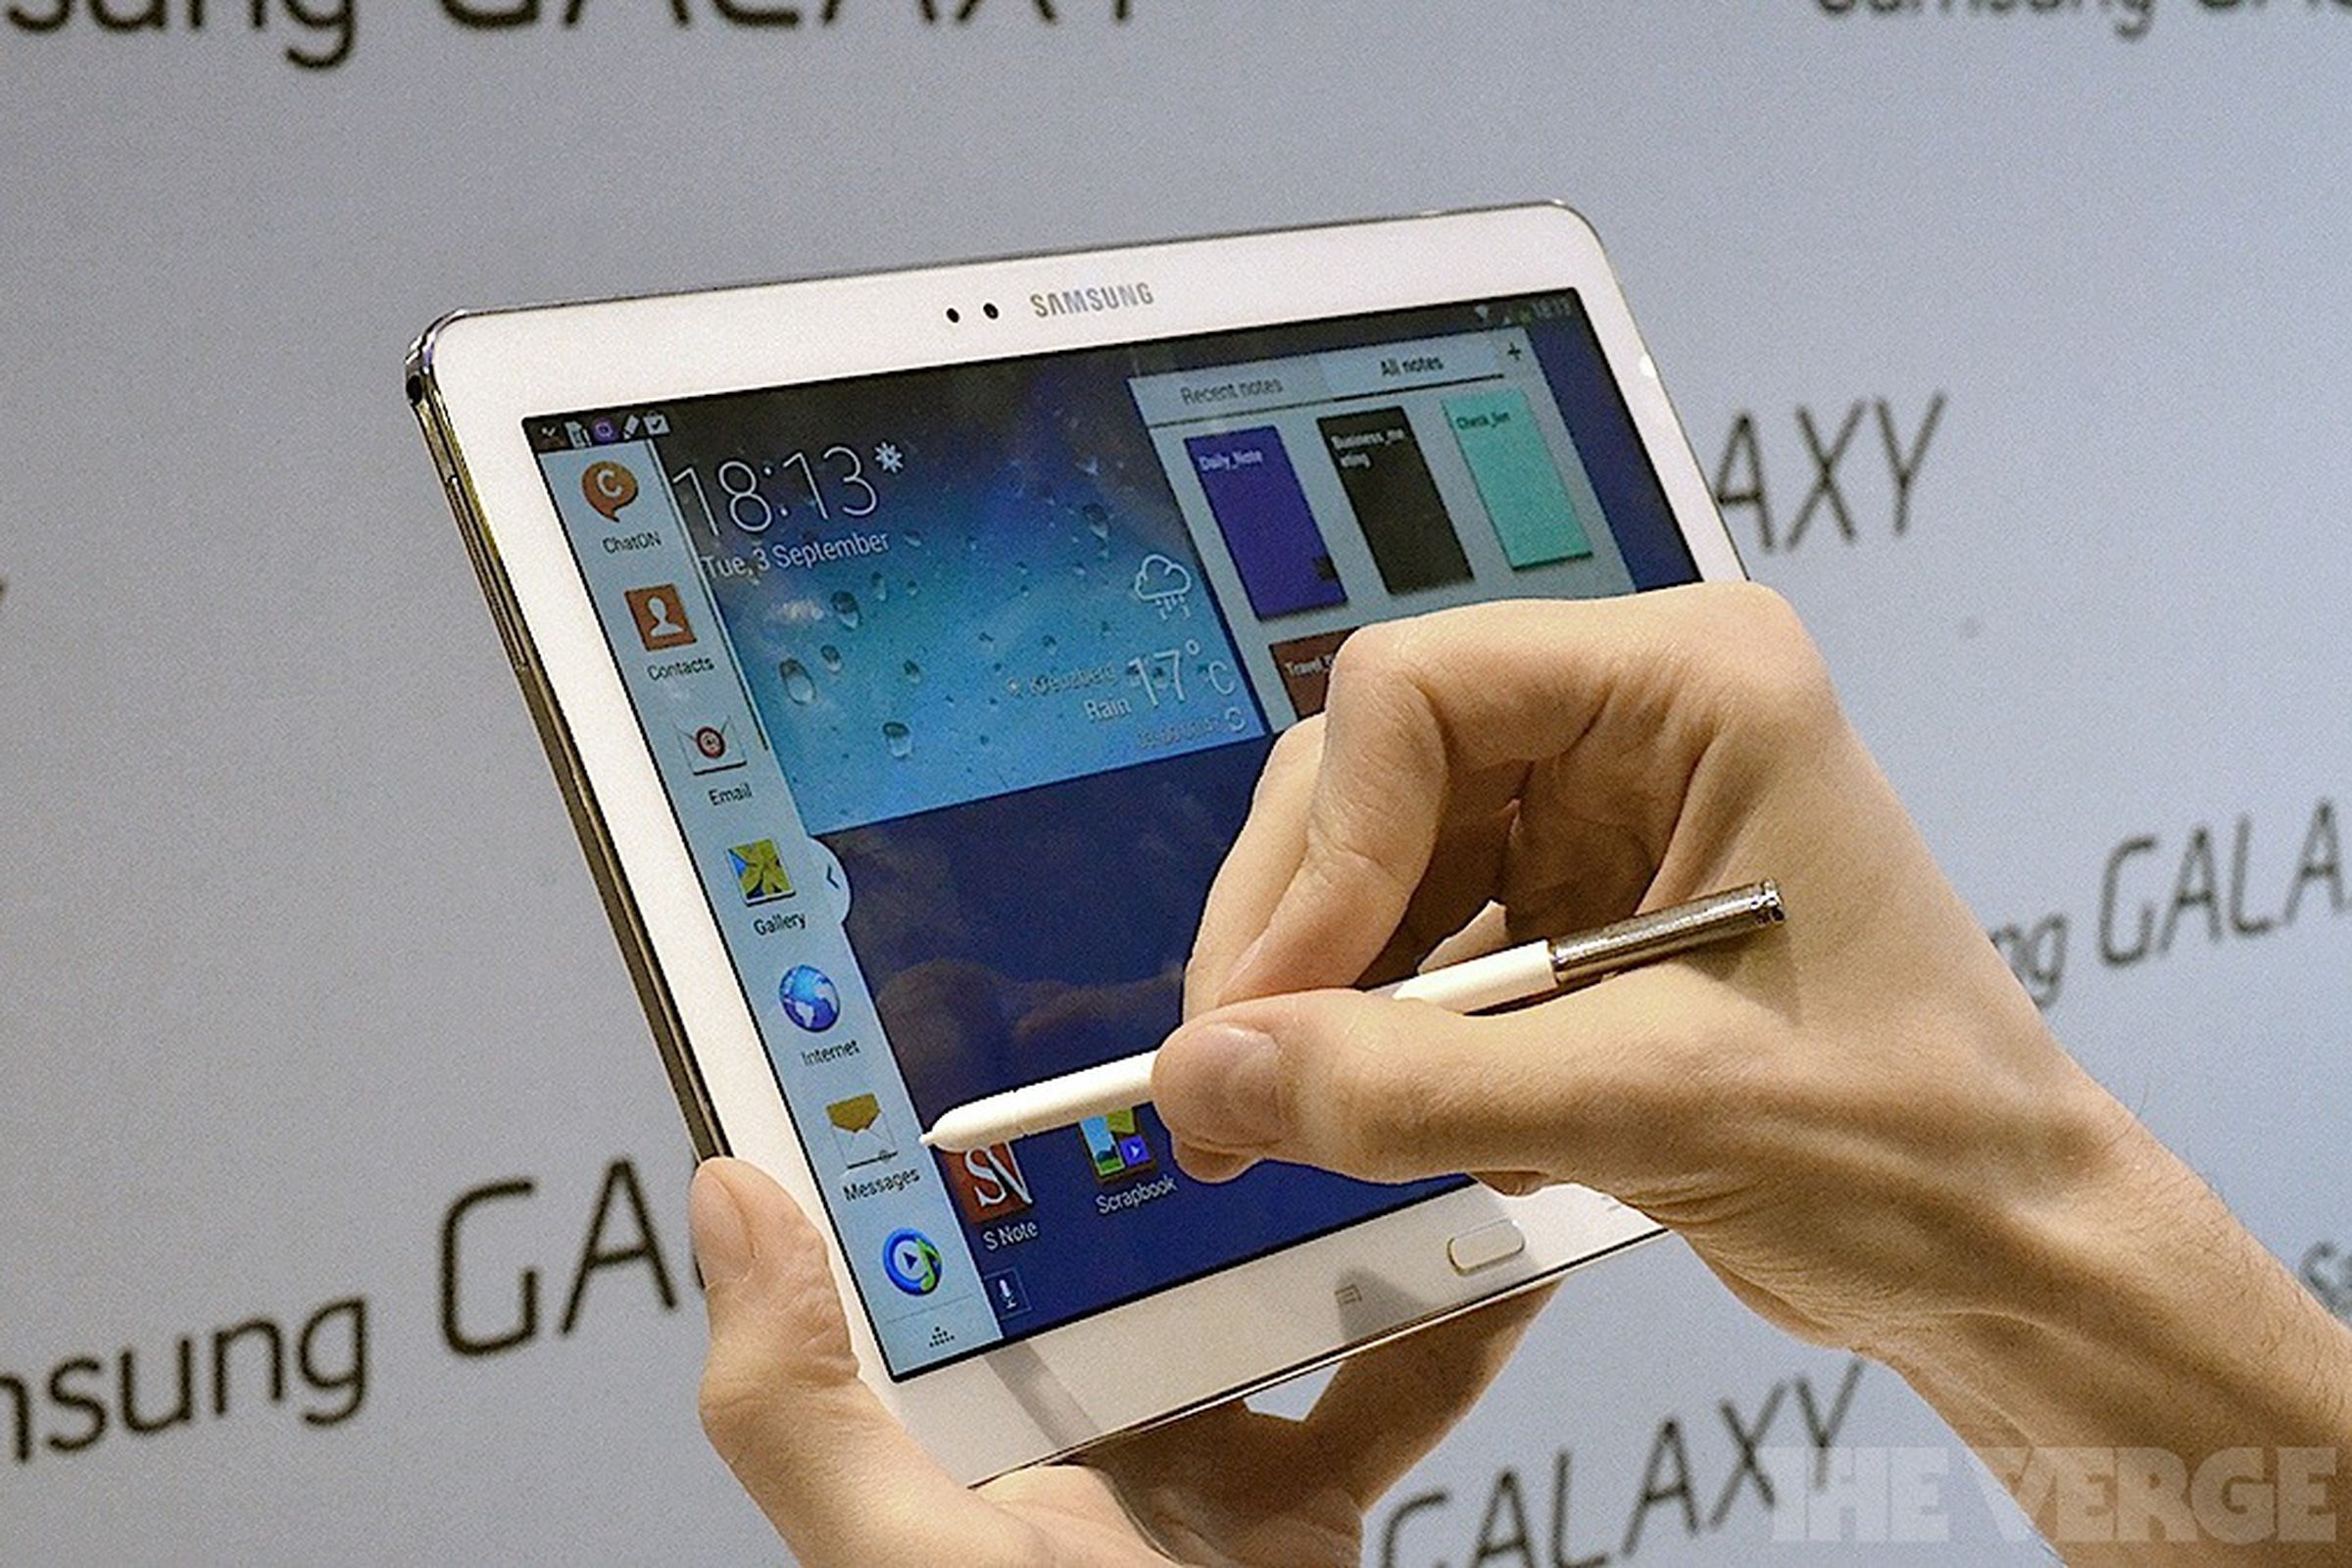 Gallery Photo: Samsung Galaxy Note 10.1 2014 edition hands-on photos